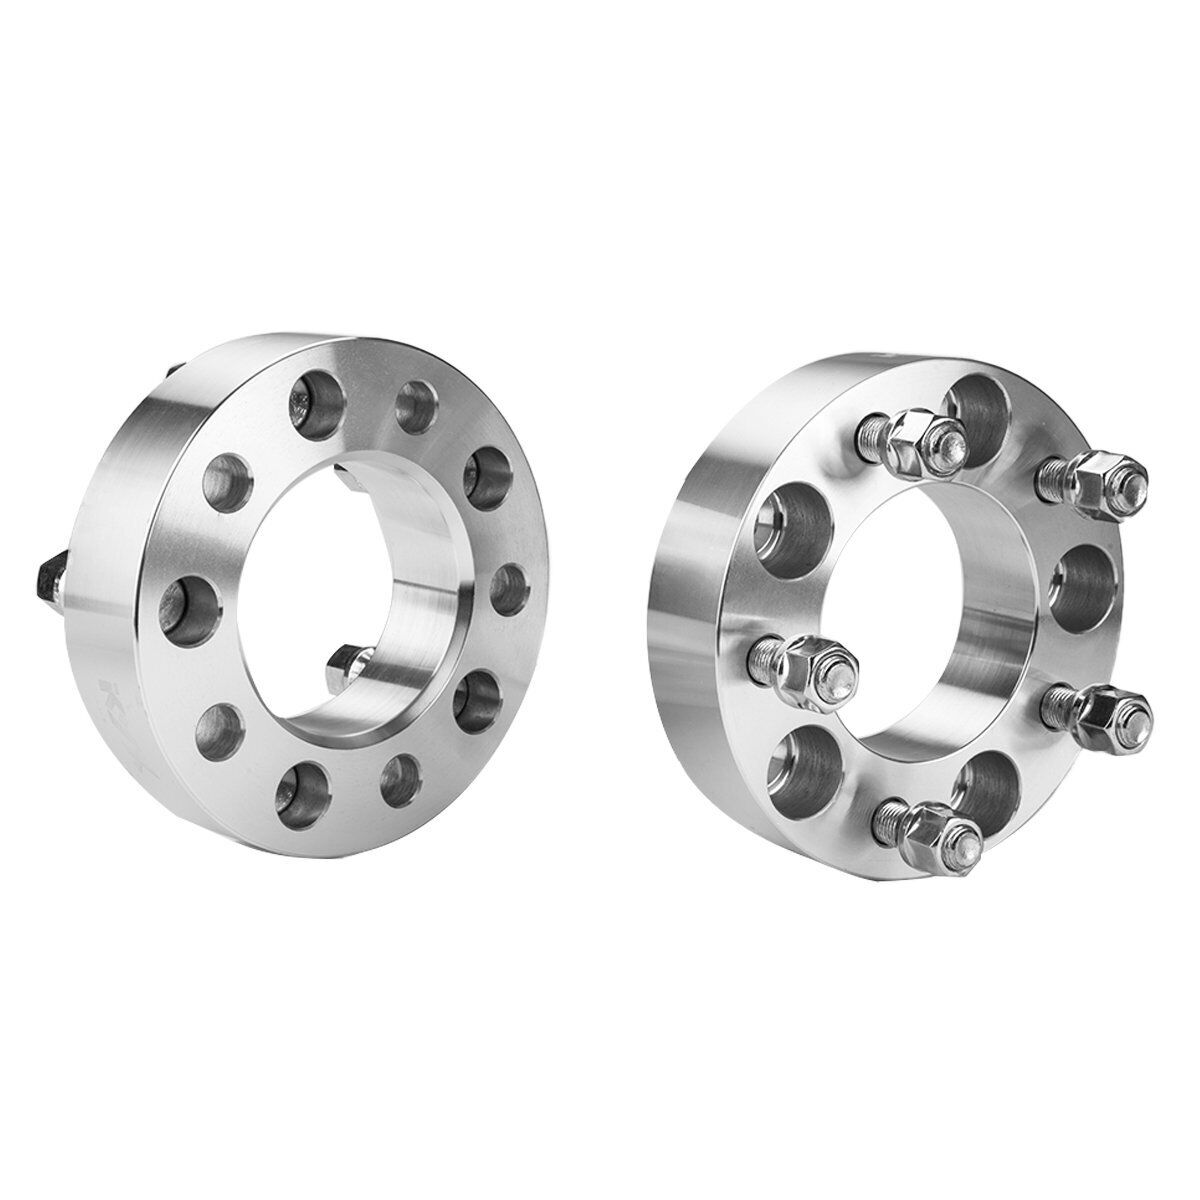 (4) 1.5"-5x5'' Wheel Spacers Adapters For 88-99 Chevrolet C1500 92-99 GMC Yukon